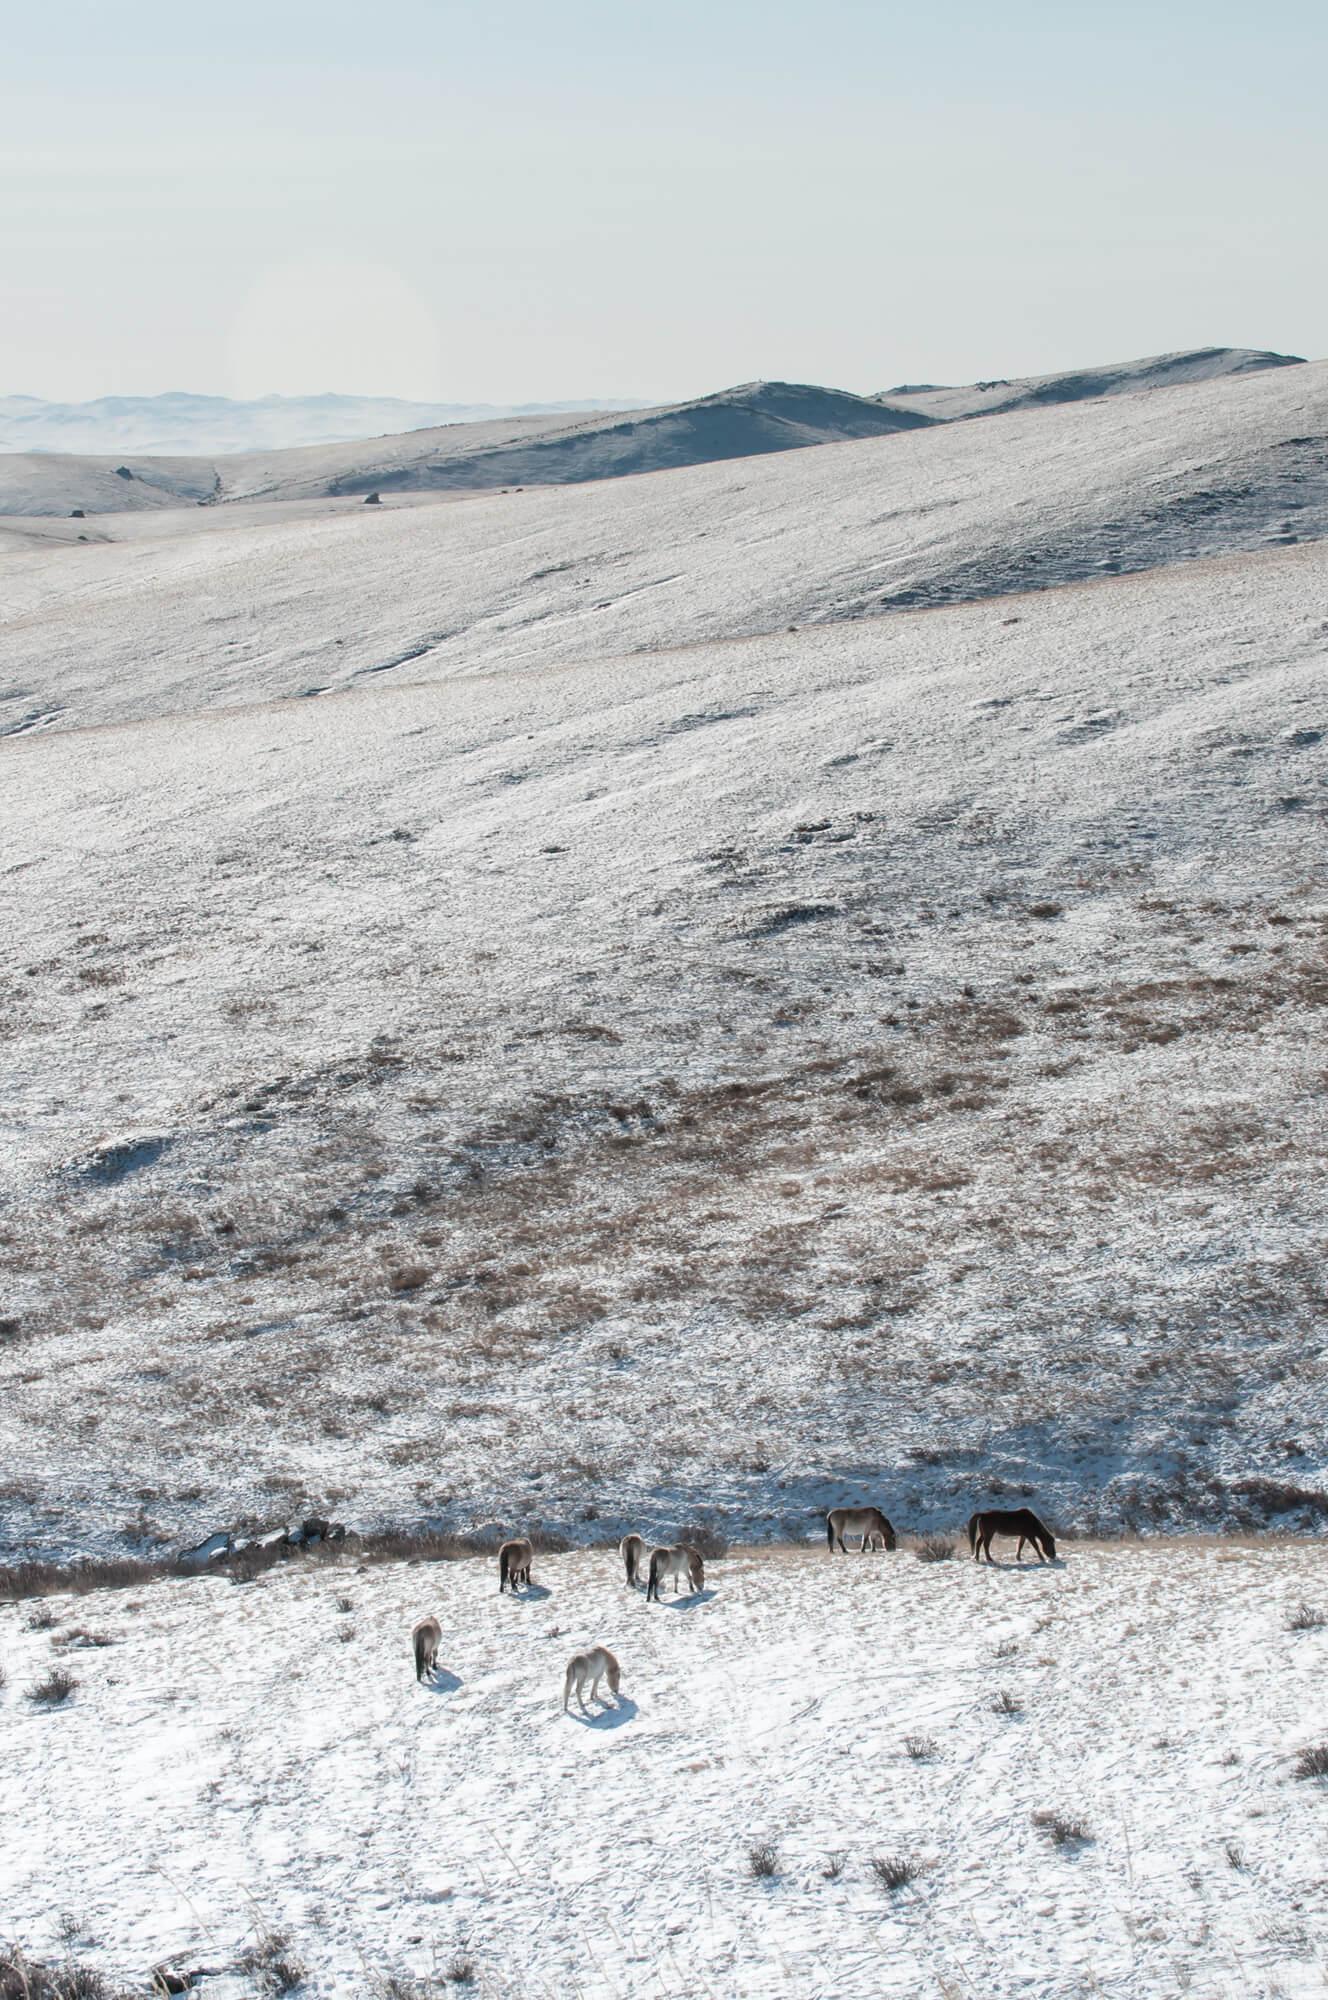 Snow-covered Hustai National Park, Mongolia, with a herd of Przewalski horses grazing in the foreground. Photographer: Astrid Harrisson. Location: Mongolia.